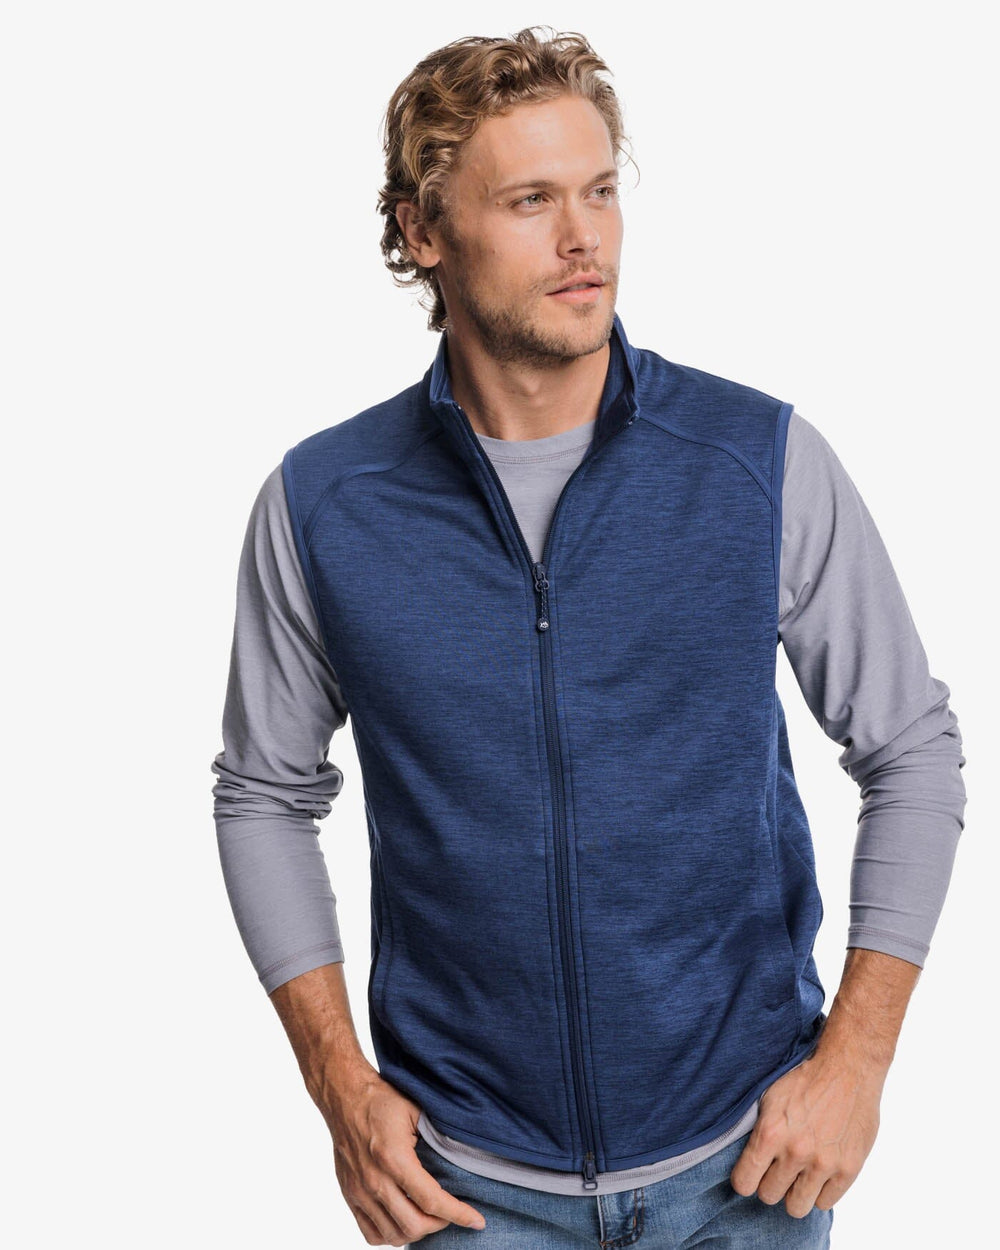 The front view of the Southern Tide Baybrook Heather Vest by Southern Tide - Heather Navy